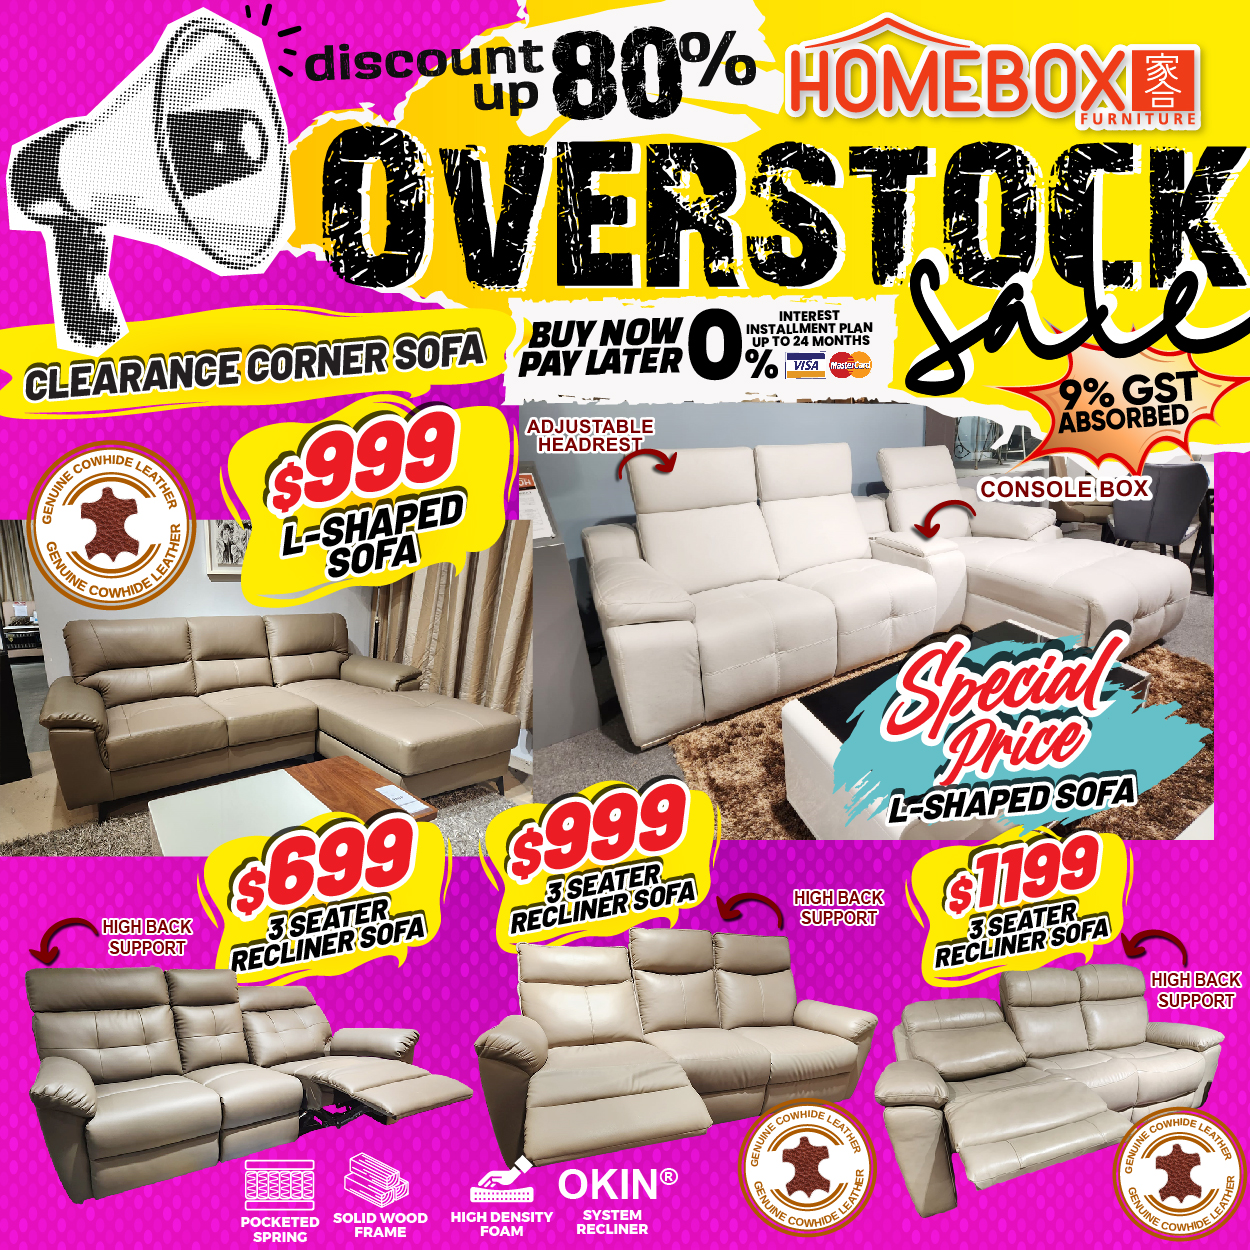 Lobang: Overstock sale at HOMEBOX Furniture @ Aljunied has furniture at up to 80% off from 17 Feb - 3 Mar 24 - 24